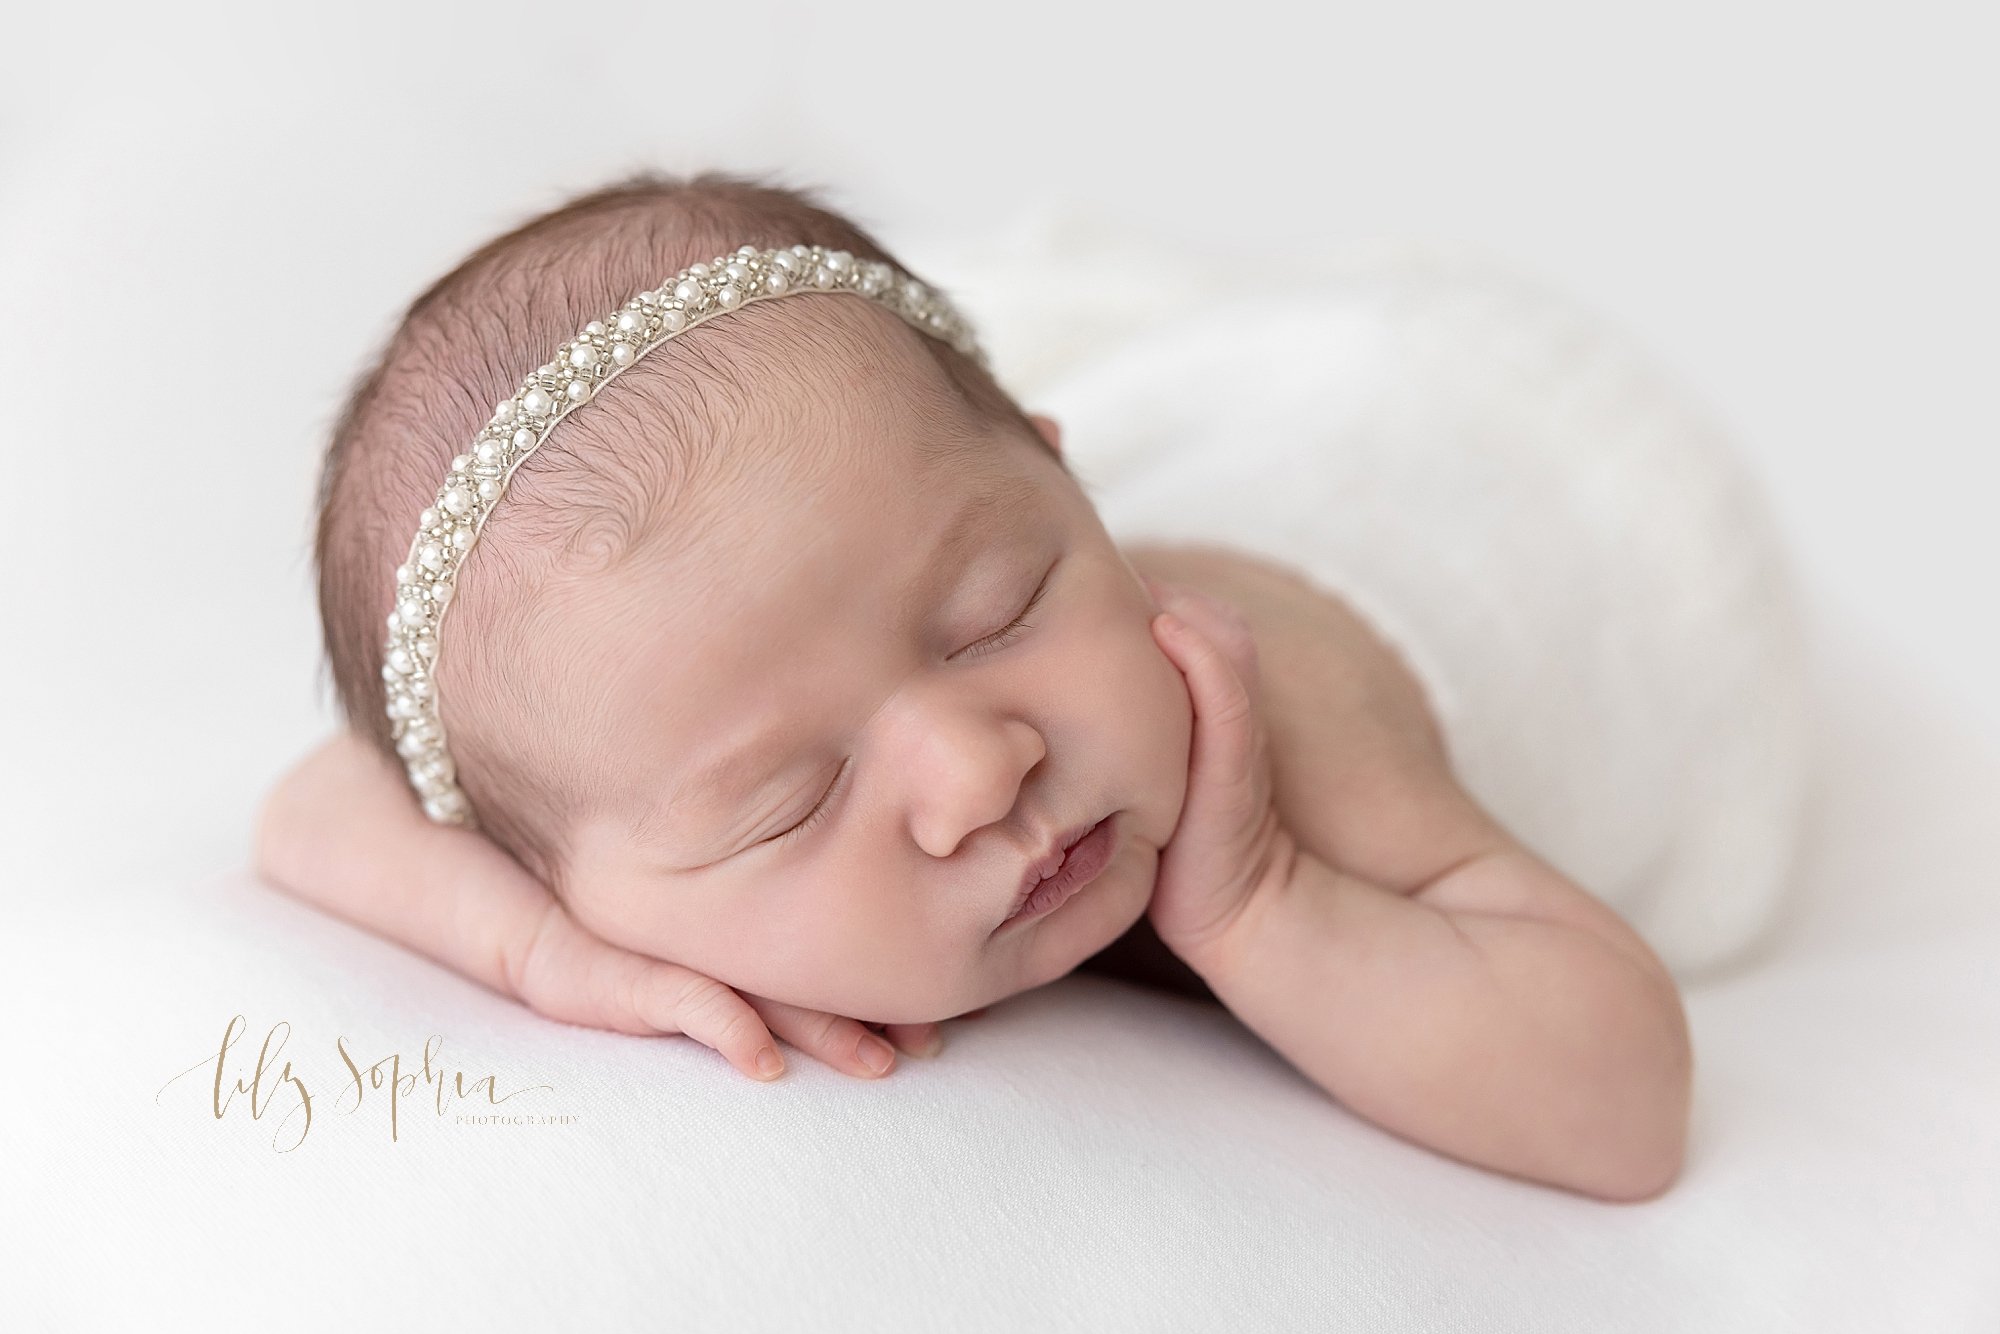  Newborn portrait of a baby girl as she lies on her stomach wearing a pearl headband on her head with her left hand on her cheek and her head resting on her right arm while draped with a soft white blanket taken in a studio near Ansley Park in Atlant